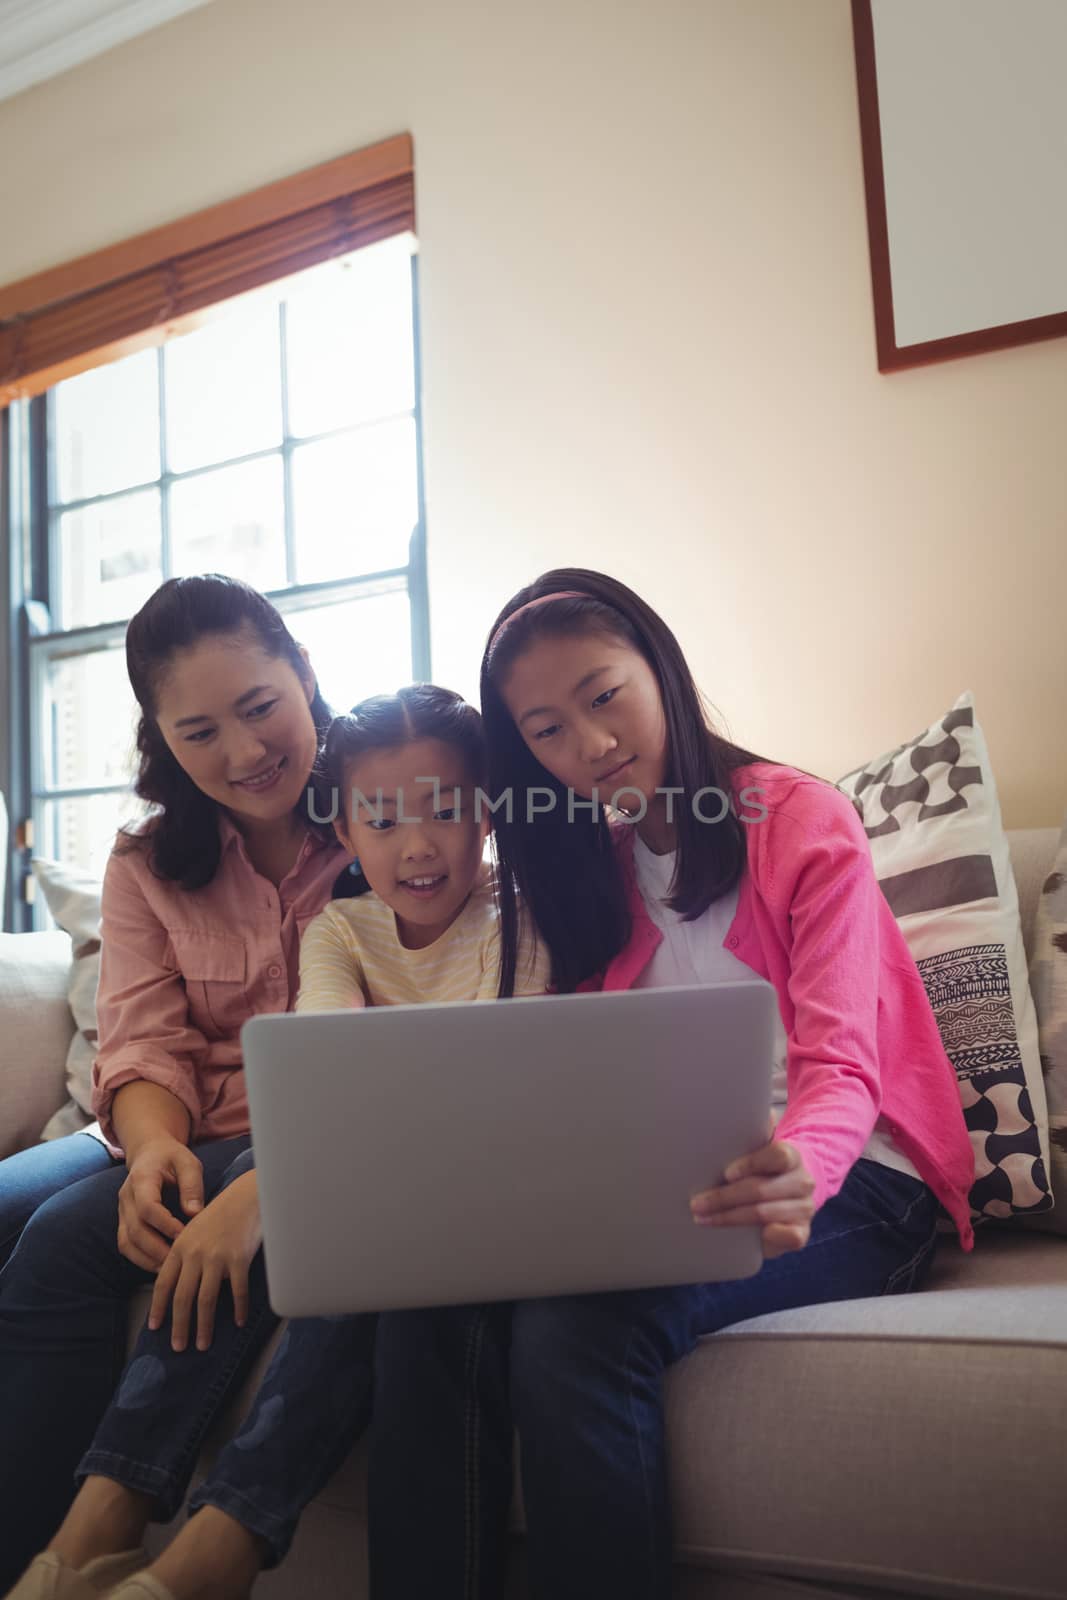 Family using laptop together in living room at home